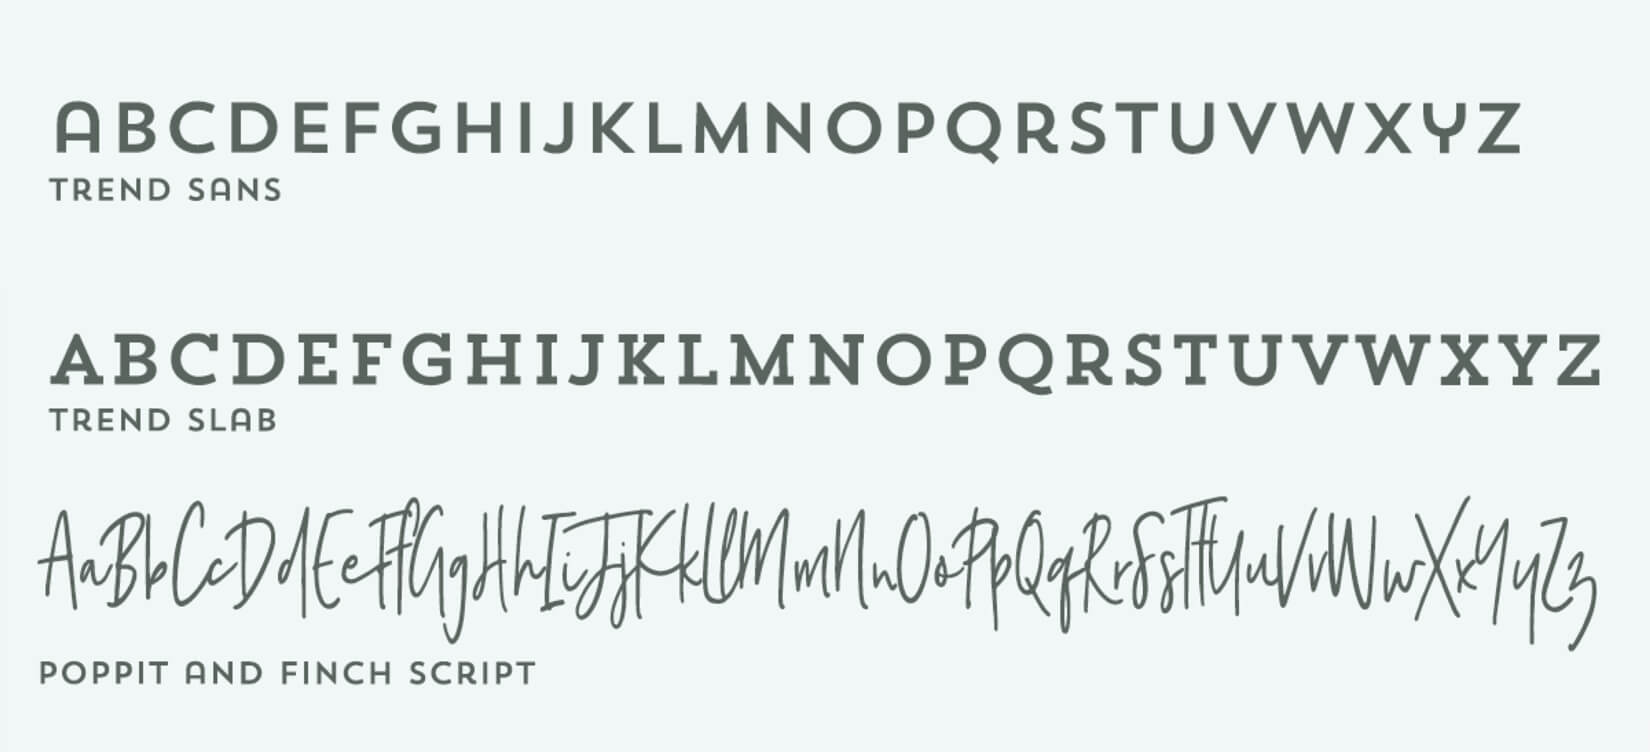 poppit and finch script